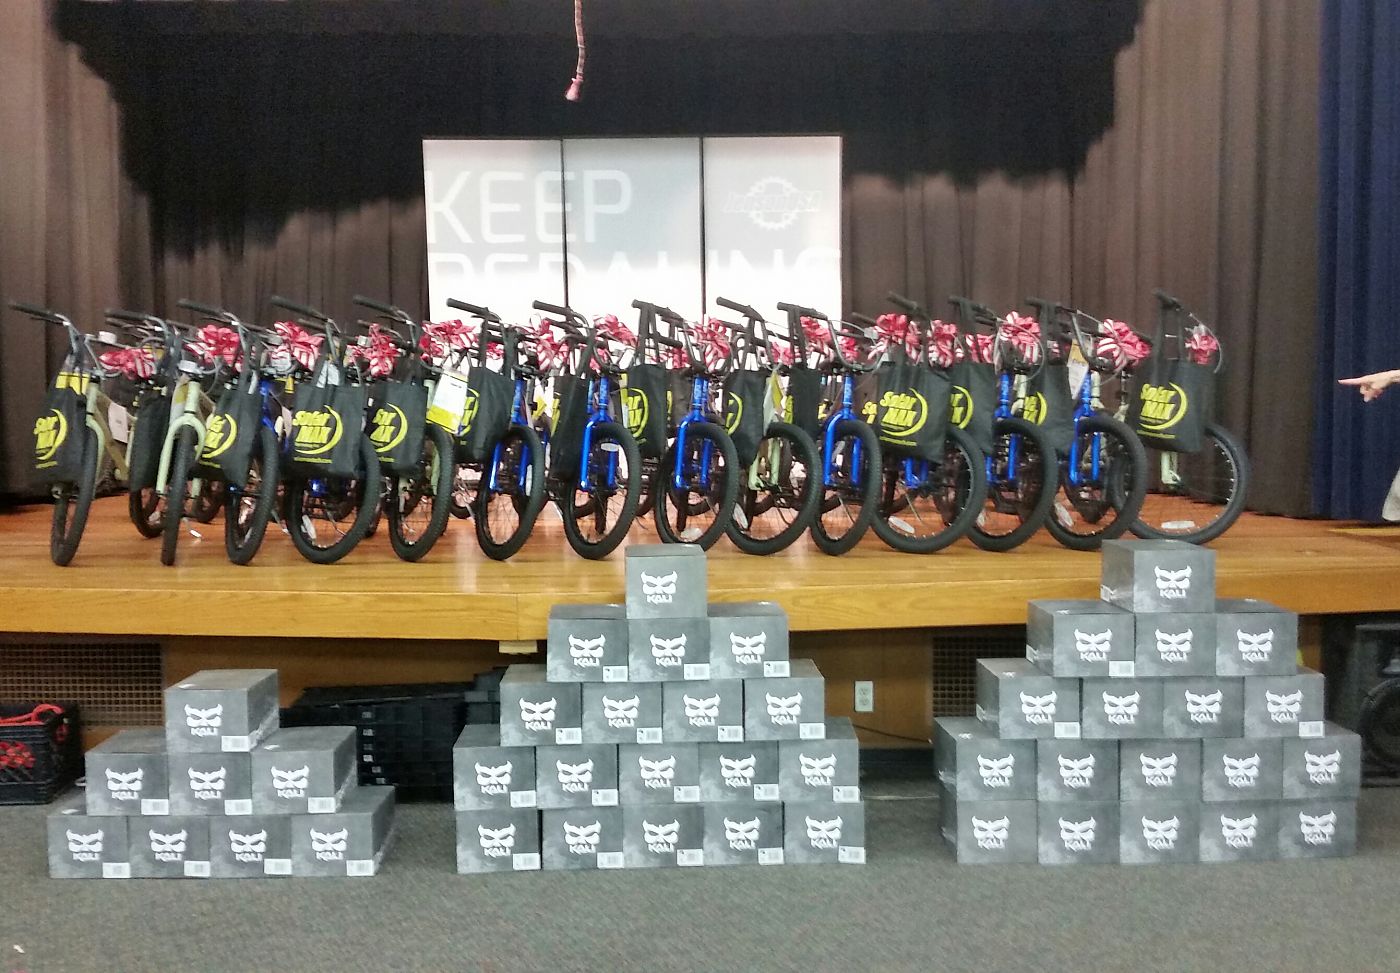 Jenson USA and Free Agent give away 60 bikes to students Bicycle Retailer and Industry News